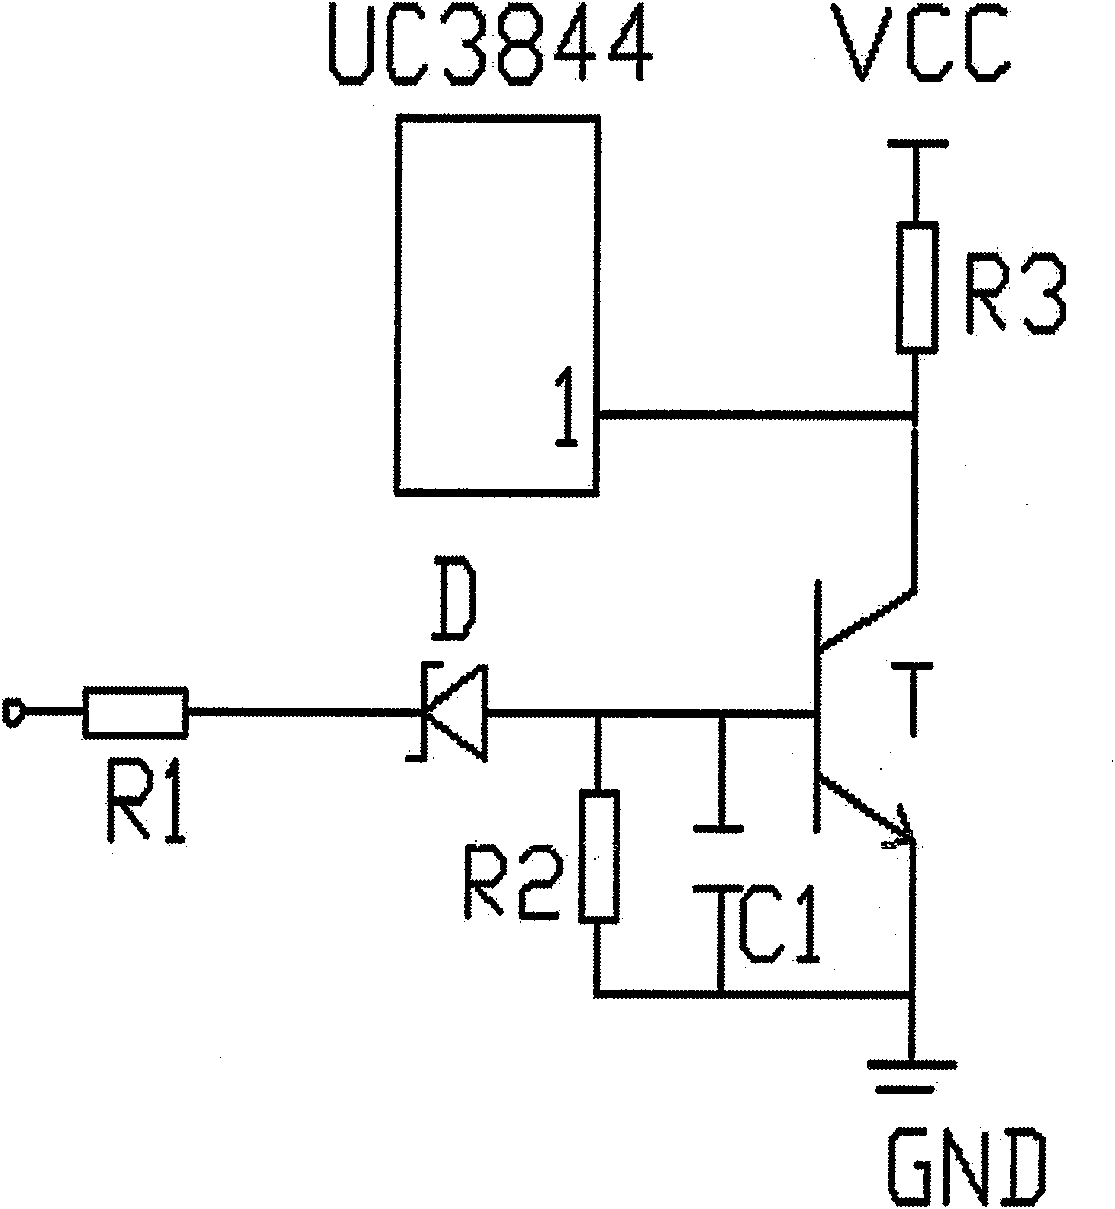 Switch power supply output overvoltage protection circuit